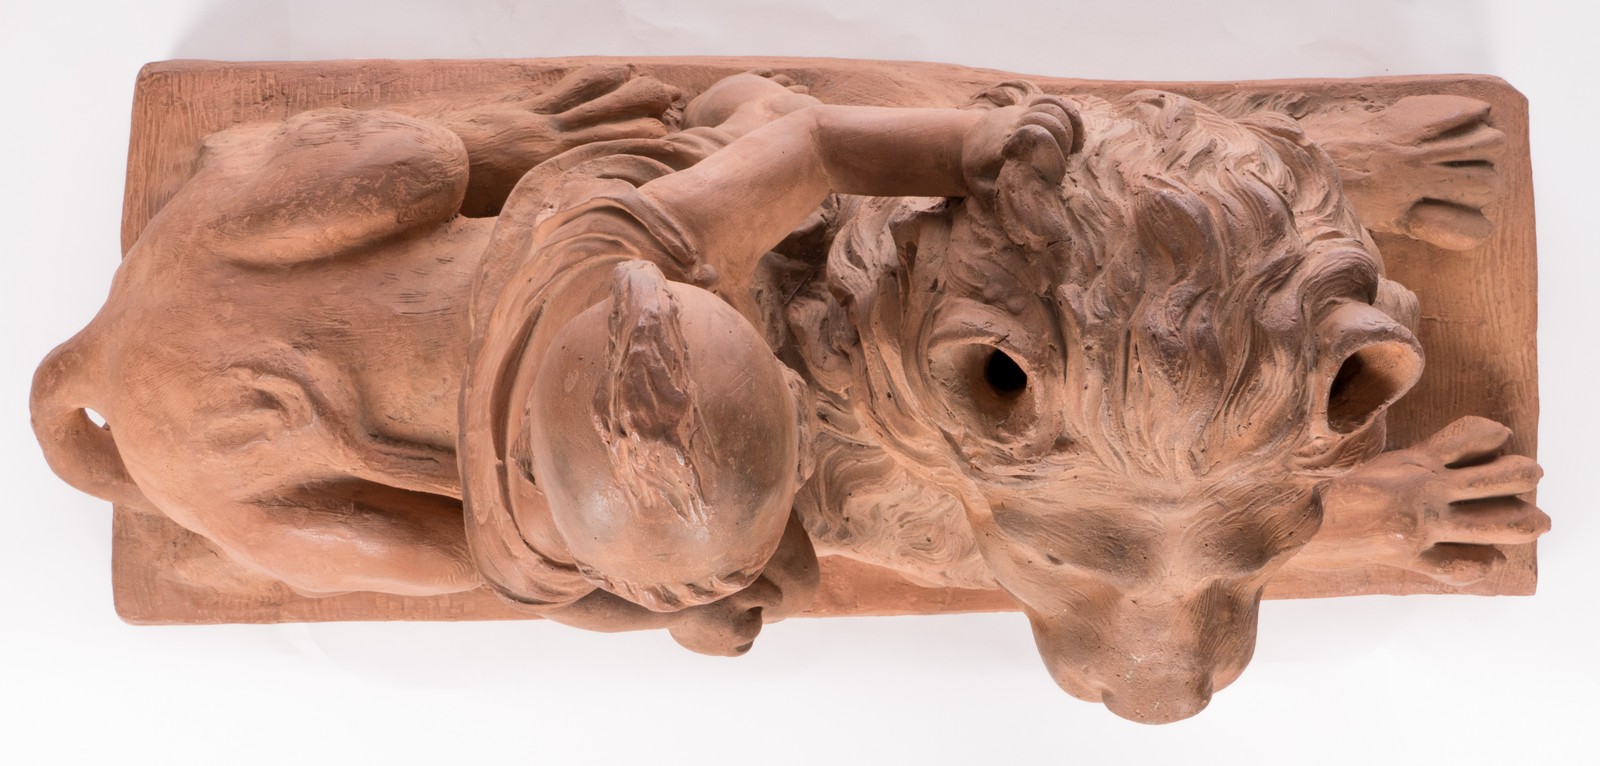 A large pair of terracotta sculptures depicting an allegoric scene, 19thC, H 78 - B 97 - D 35 cm - Image 16 of 62